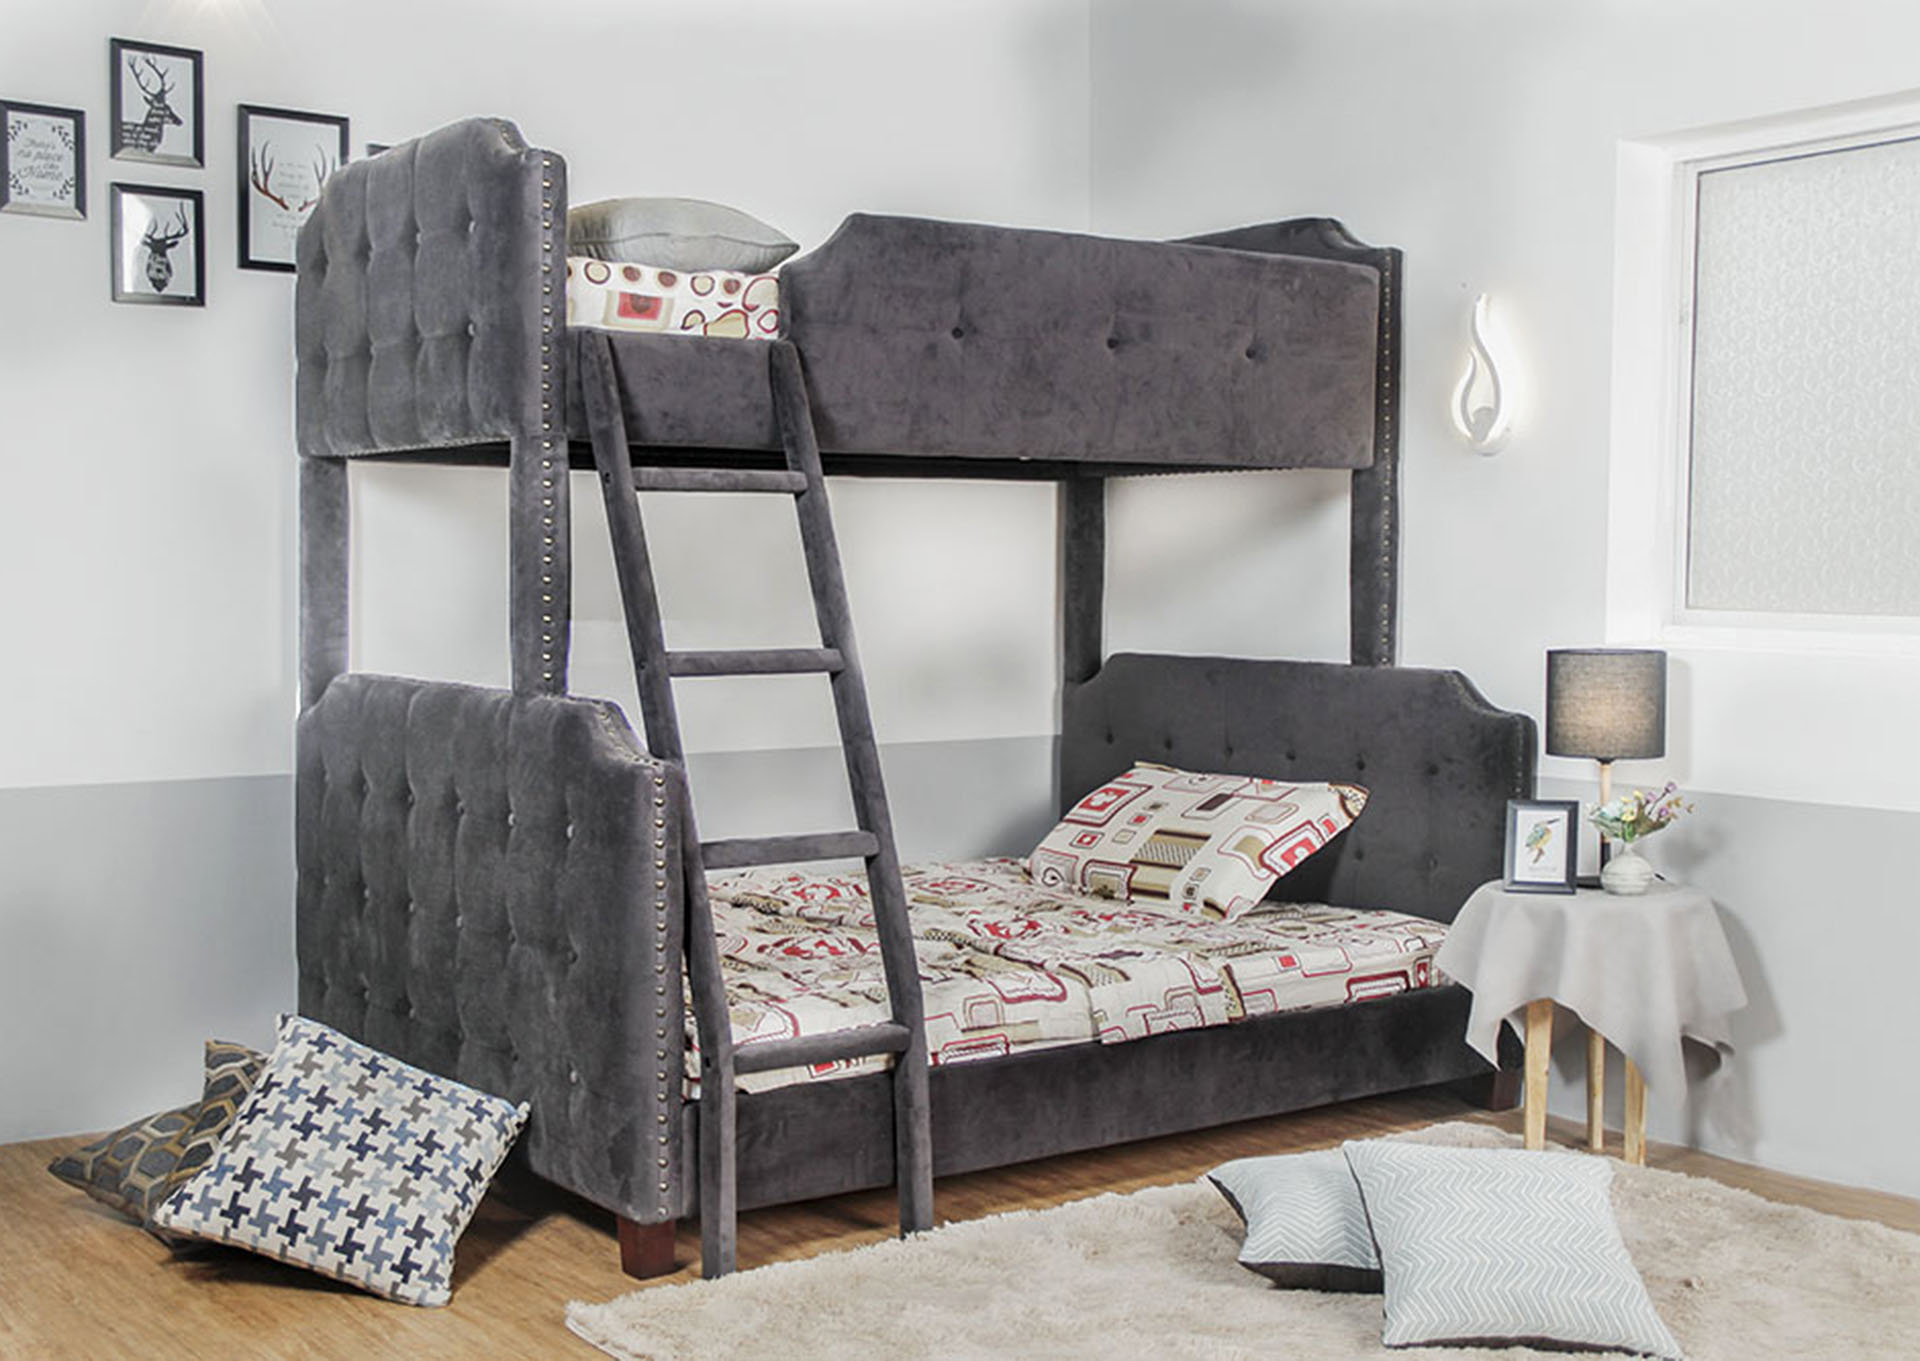 Coby Gray Bunk Bed,Galaxy Home Furniture